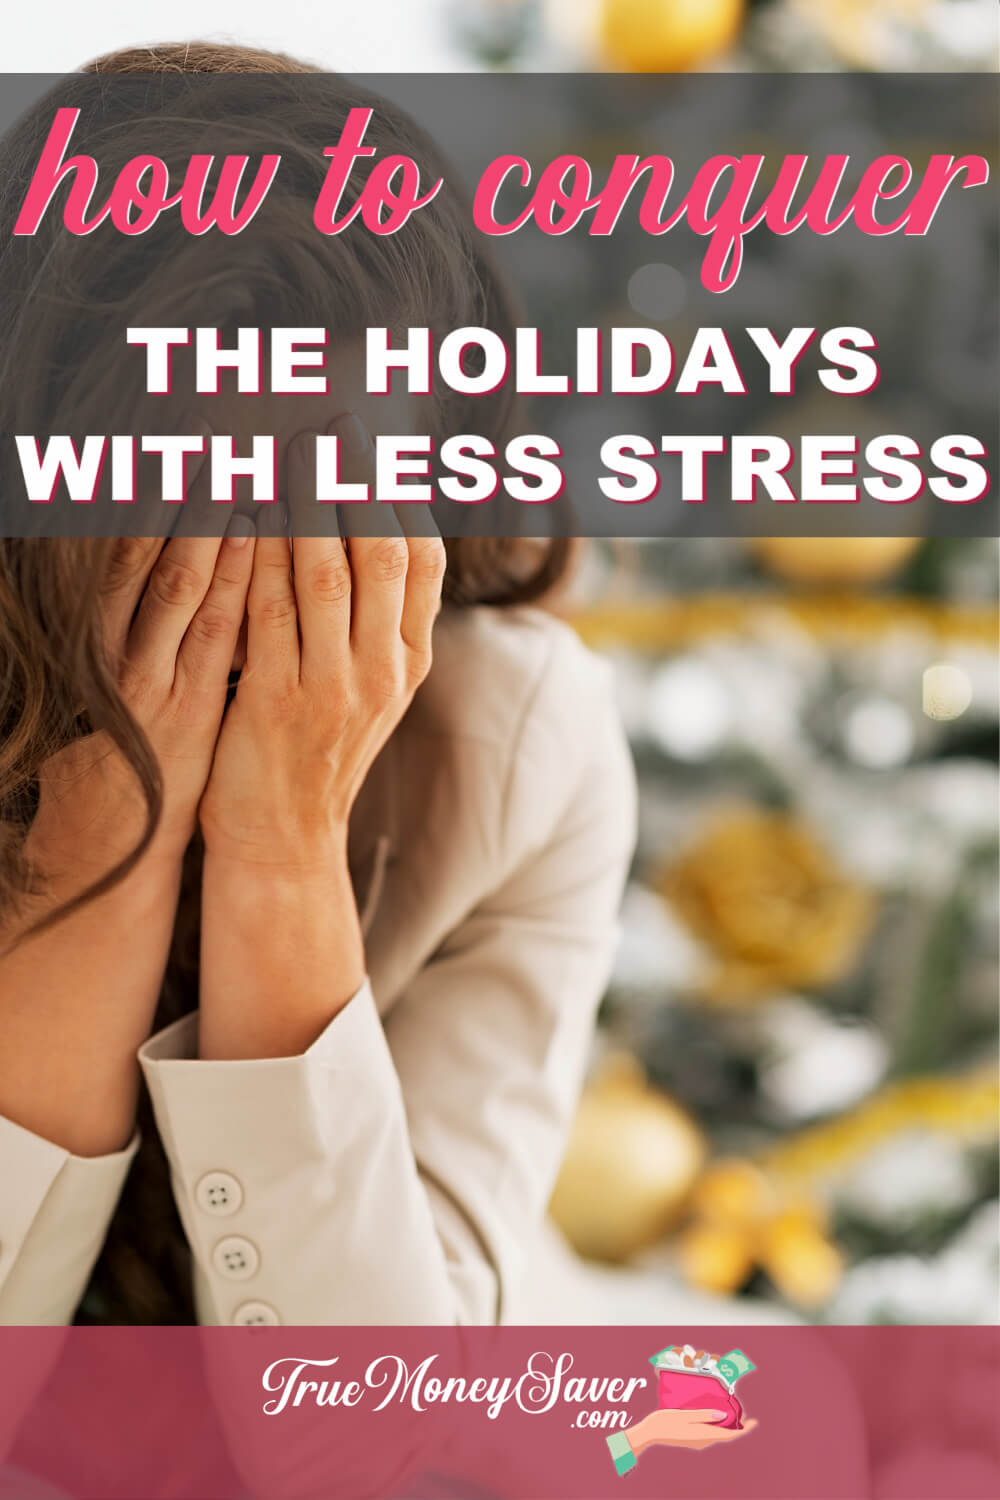 Tips For Less Financial Holiday Stress - How To Easily Conquer The Holidays